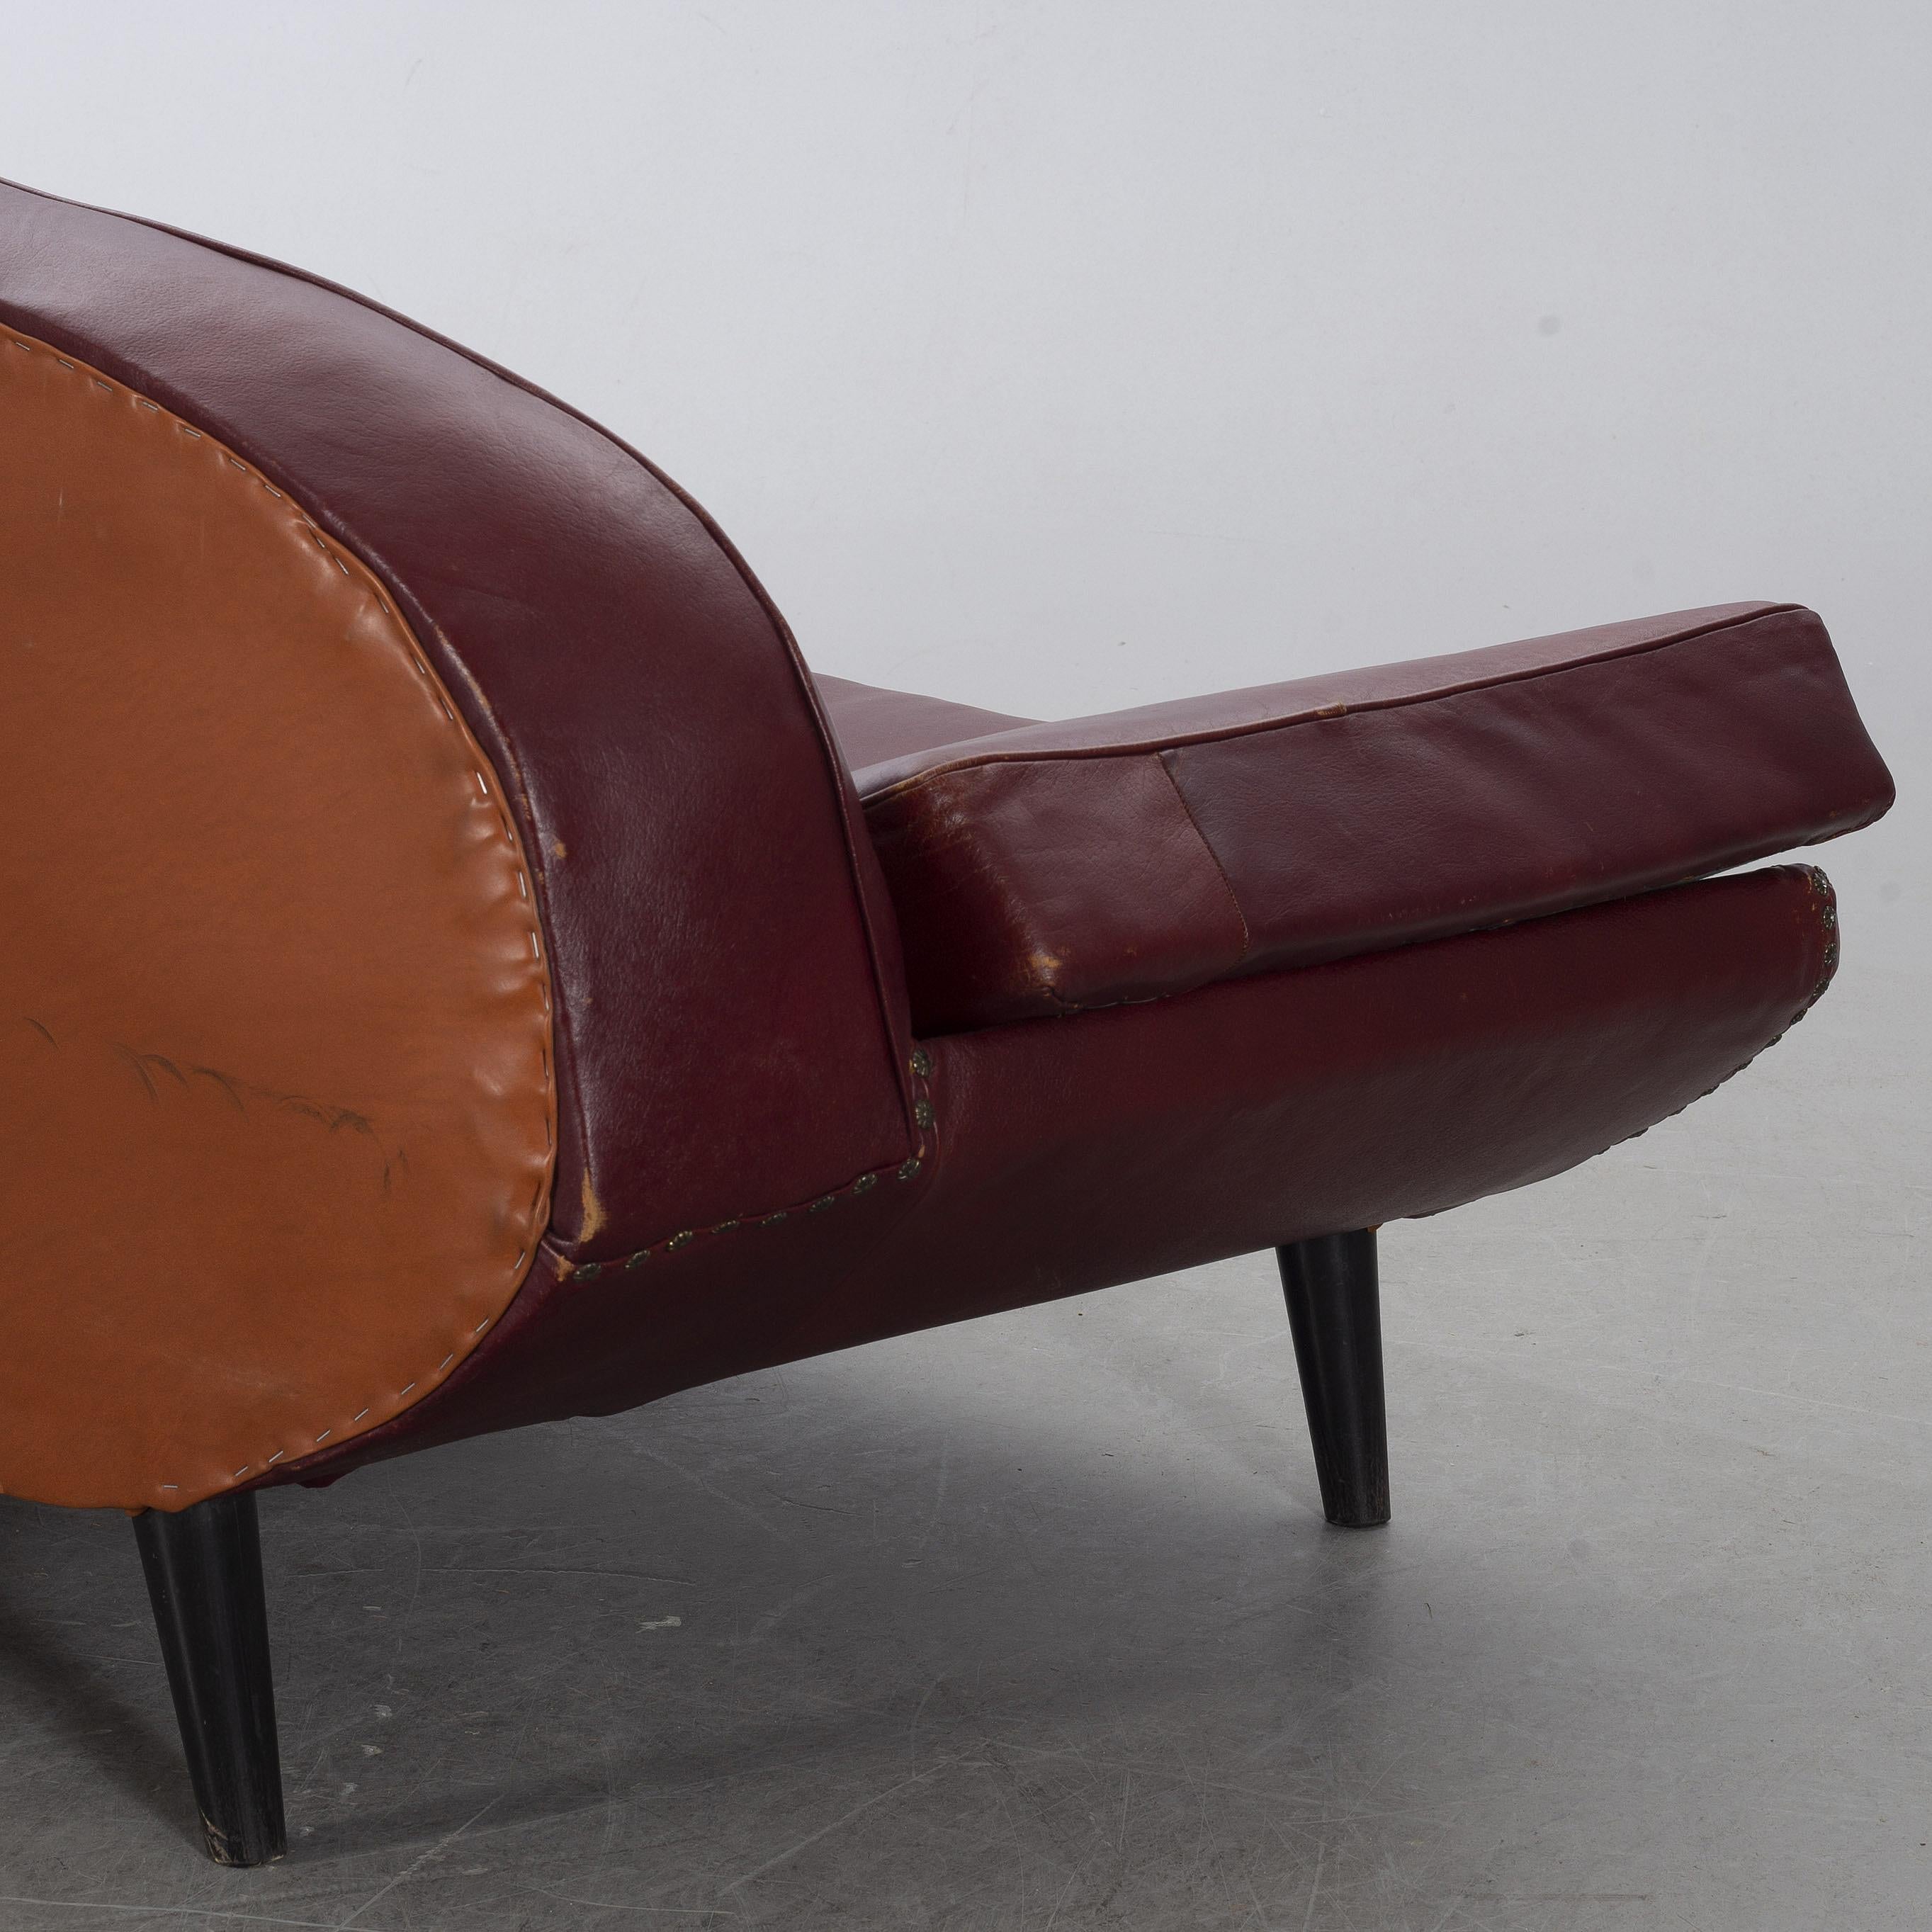 Swedish Rare Folke Jansson Sofa or Daybed, Sweden, 1950s, Suitable for Recovering